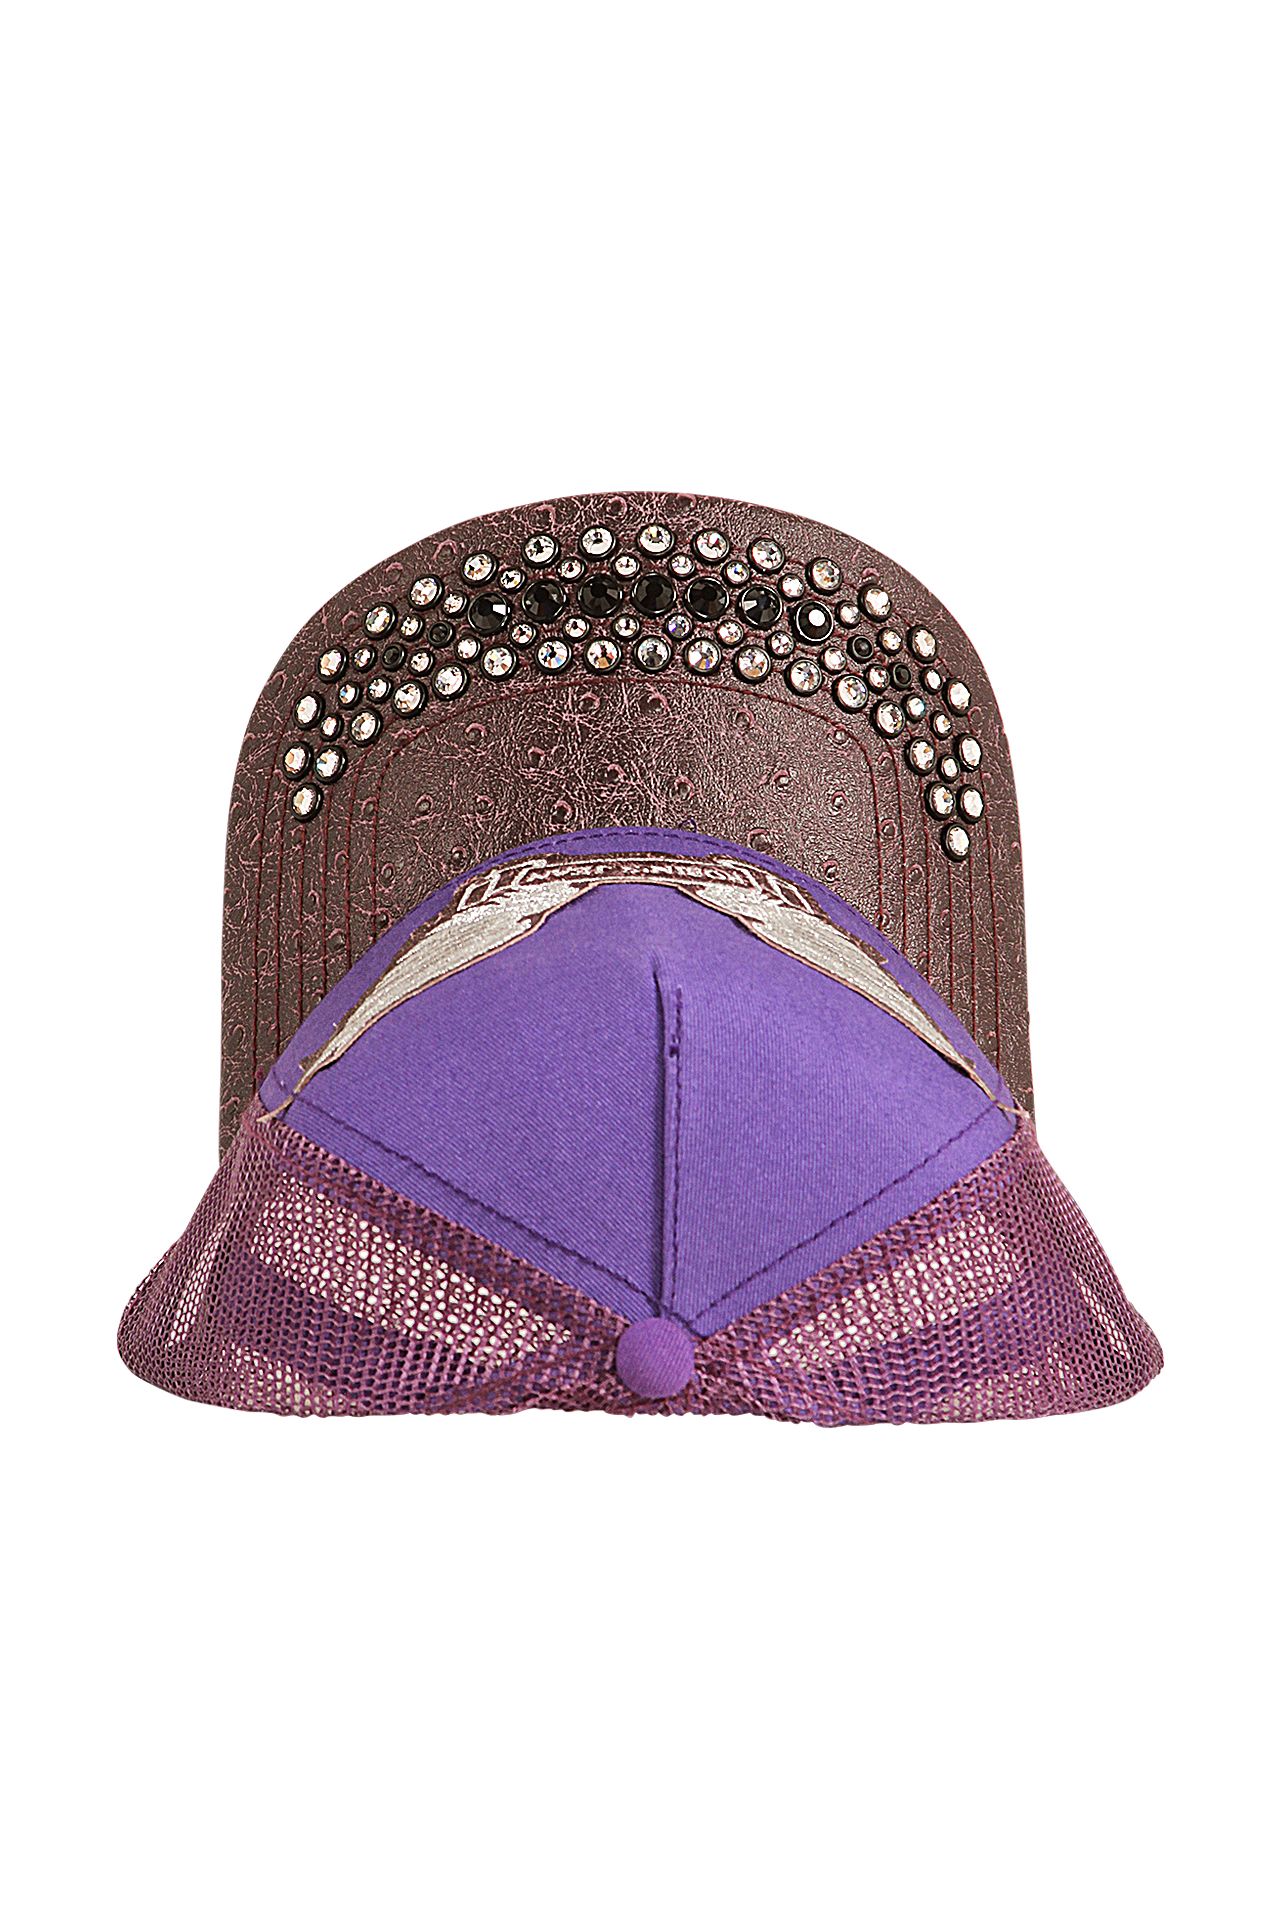 PURPLE OSTRICH CAP WITH BLACK & CLEAR CRYSTALS